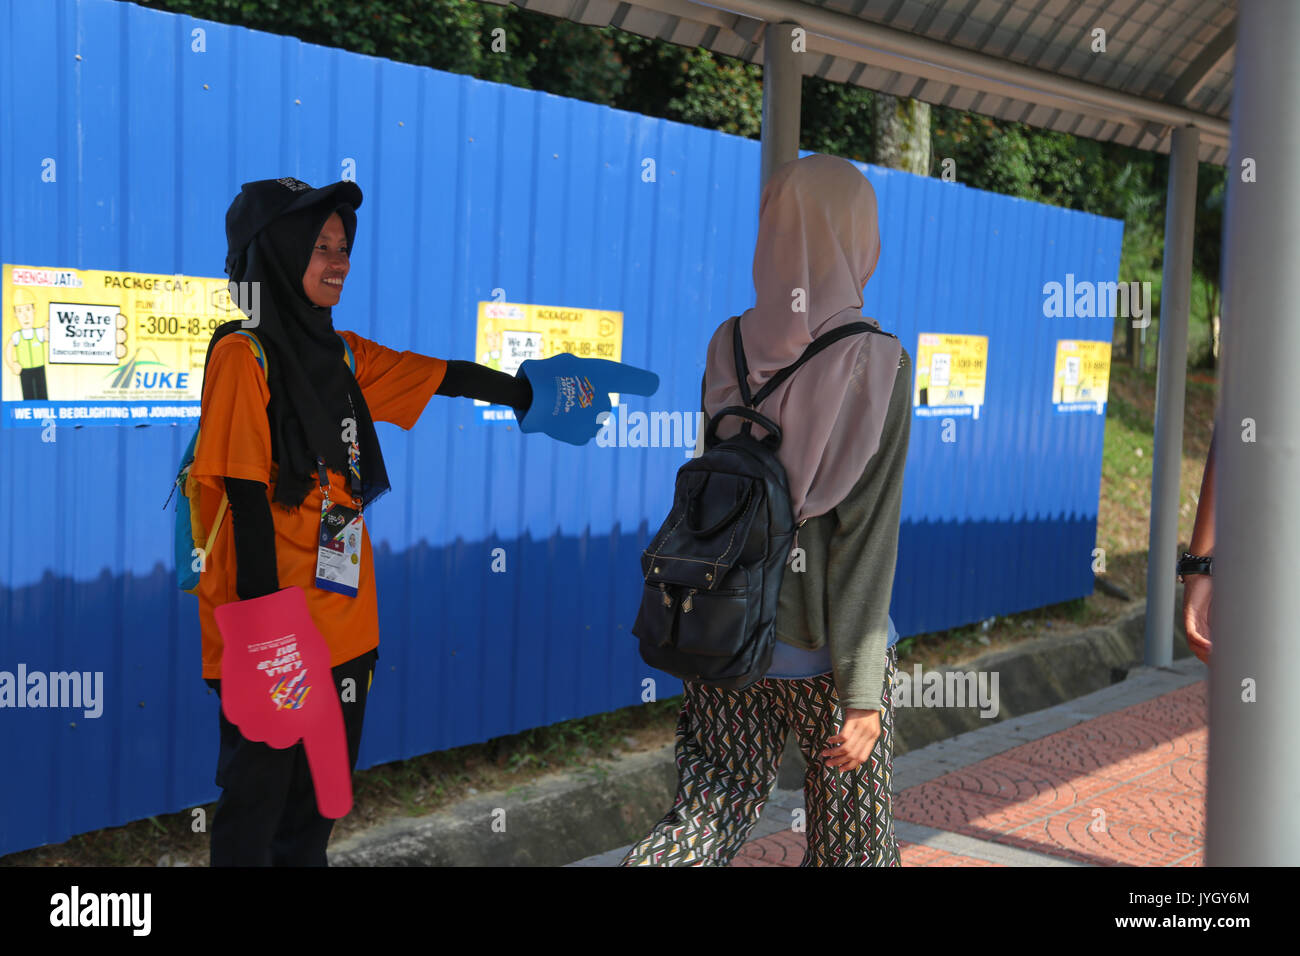 Young volunteer giving direction to stadium hosting the opening ceremony of 29th SEA games. Credit: Calvin Chan/Alamy Live News Stock Photo